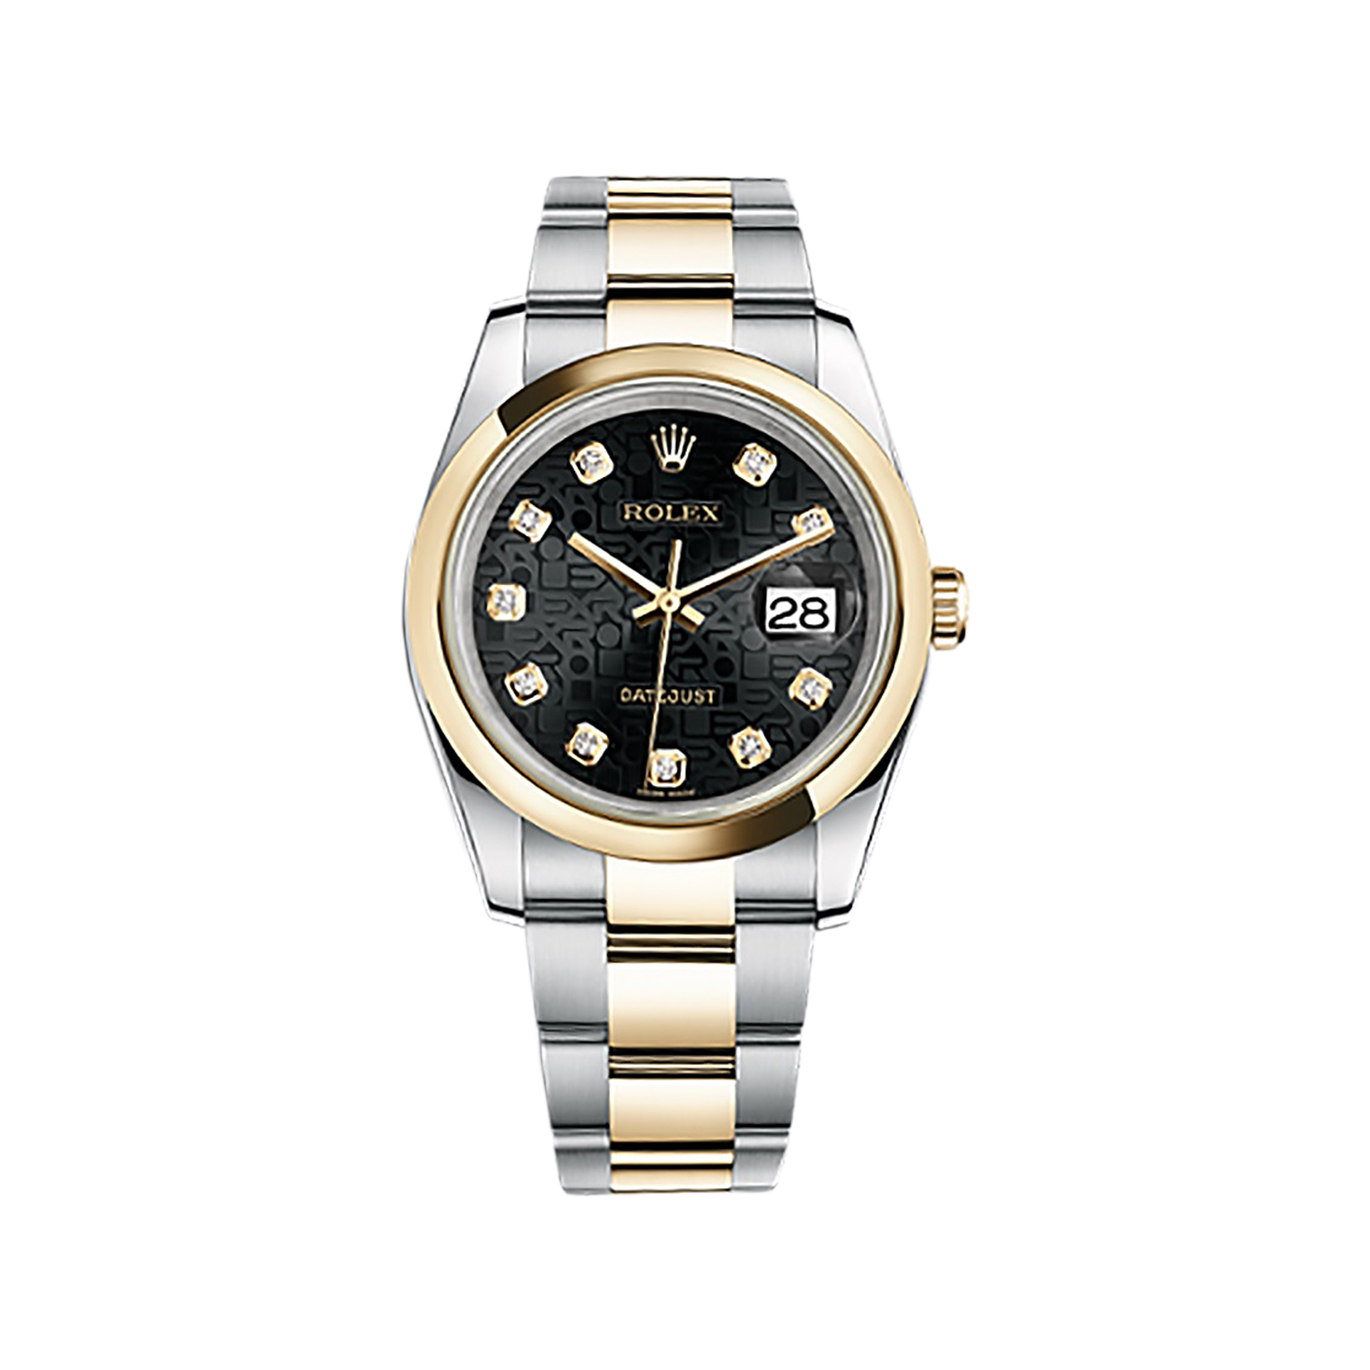 Datejust 36 116203 Gold & Stainless Steel Watch (Black Jubilee Design Set with Diamonds)